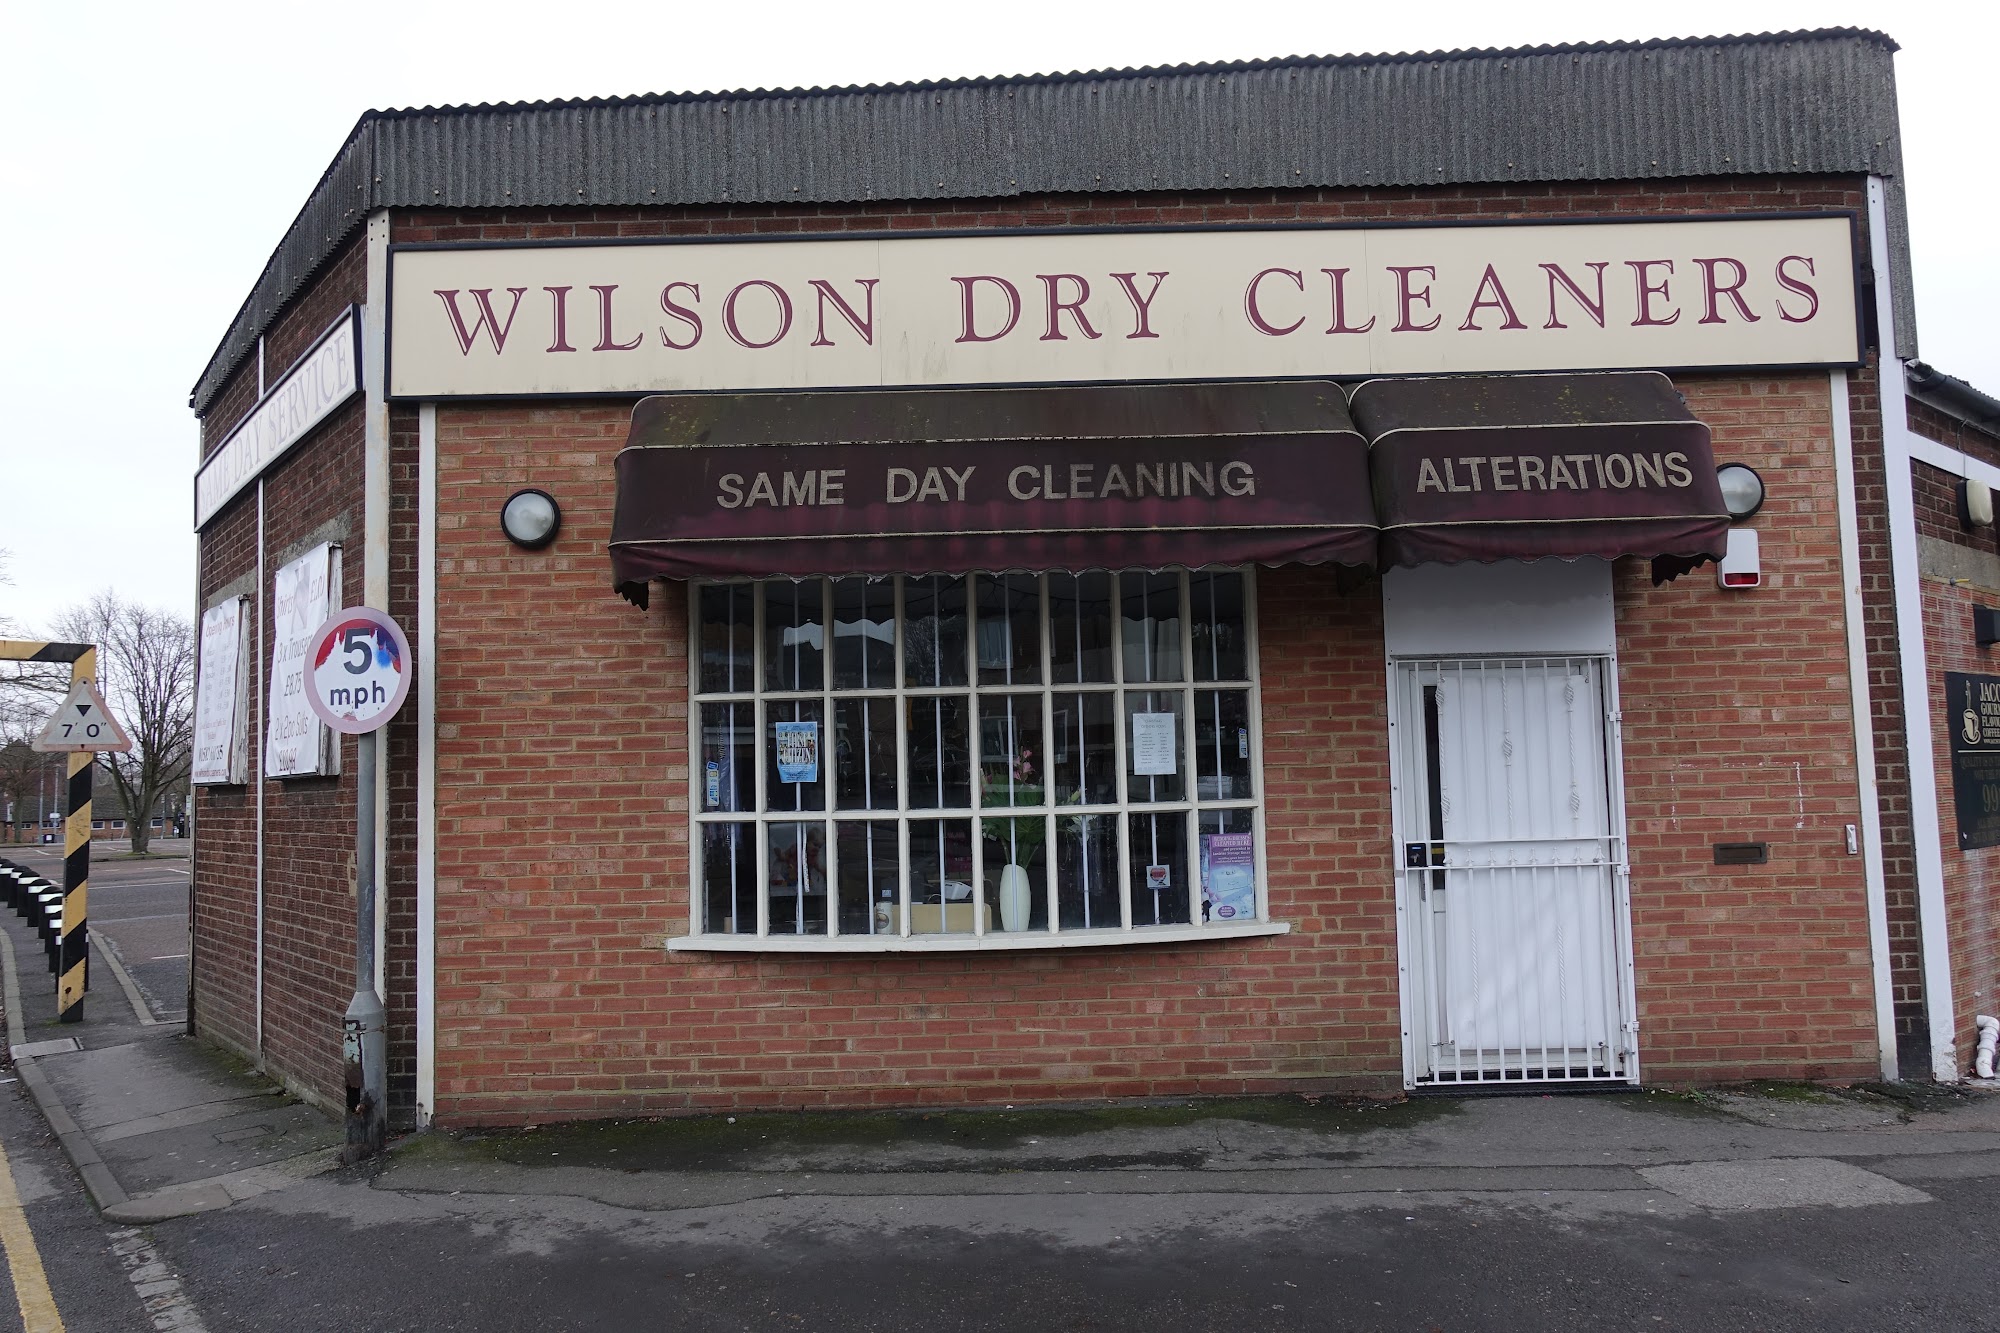 Wilsons Dry Cleaners